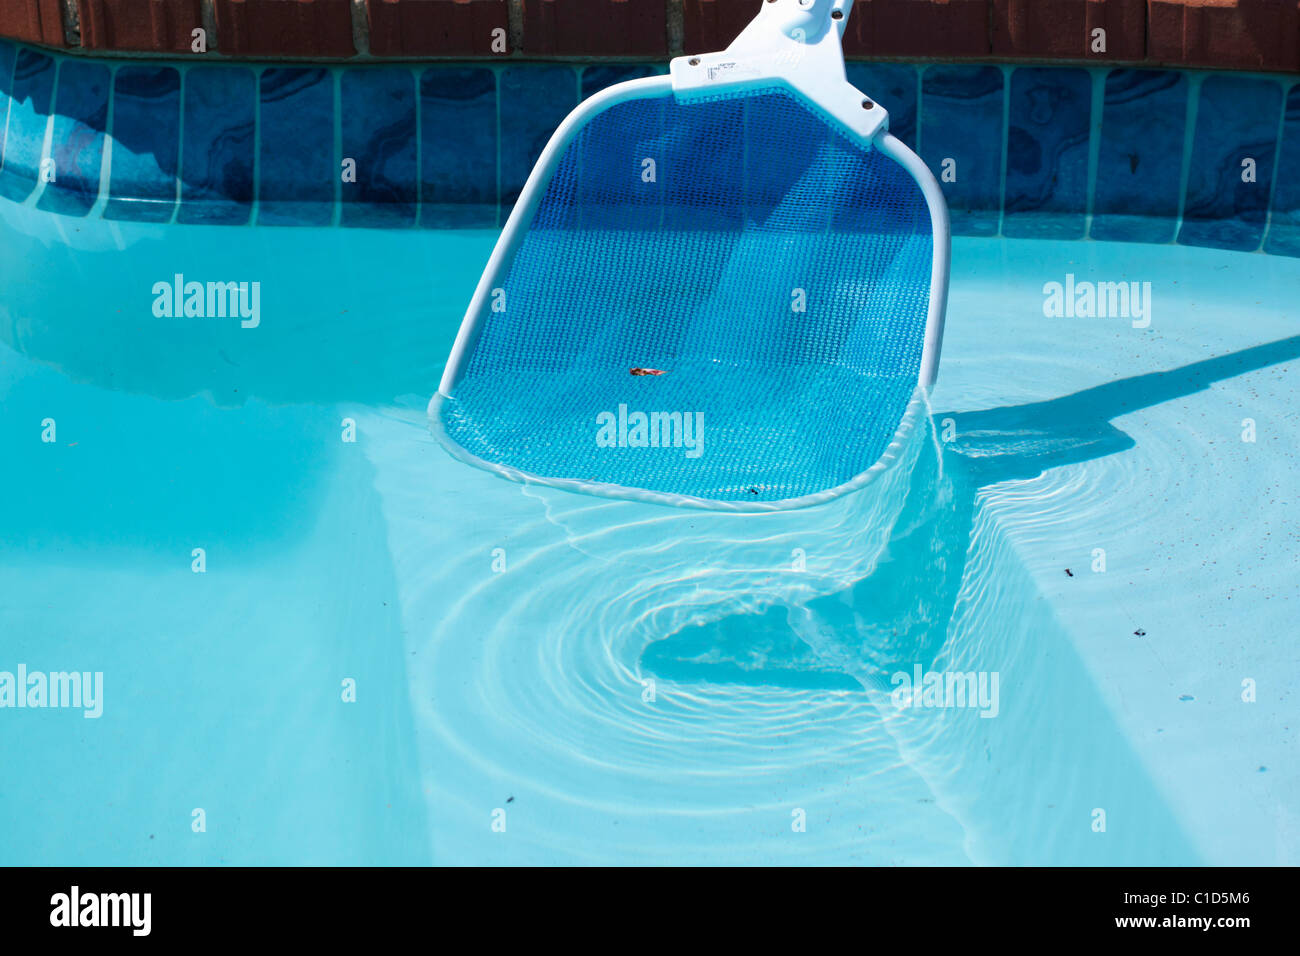 A swimming pool skimmer net being used to remove floating debris. Stock Photo